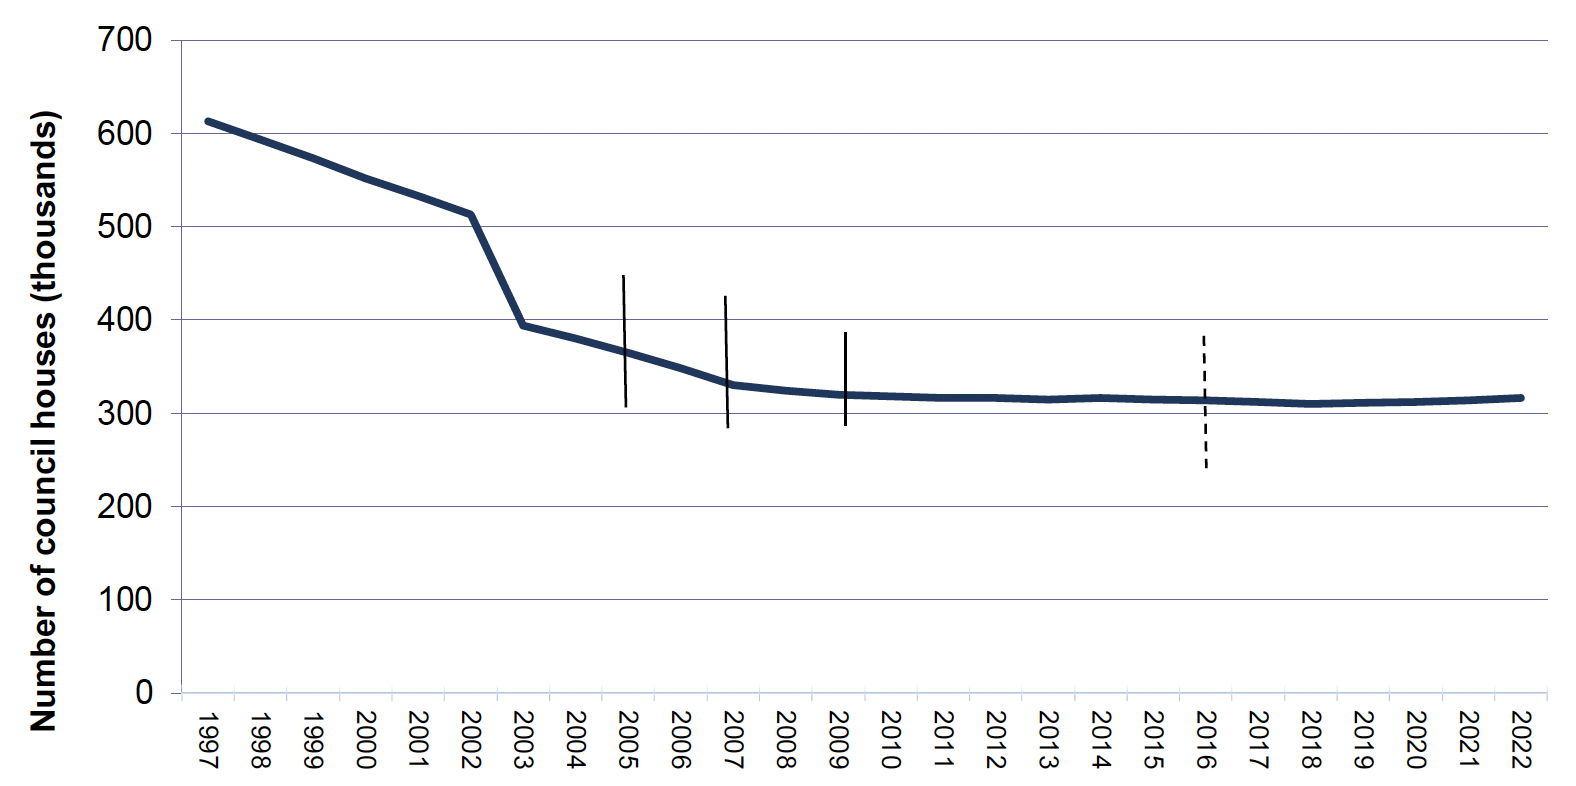 Line chart showing the number of council houses per year, in Scotland, from 1997 to 2022. 